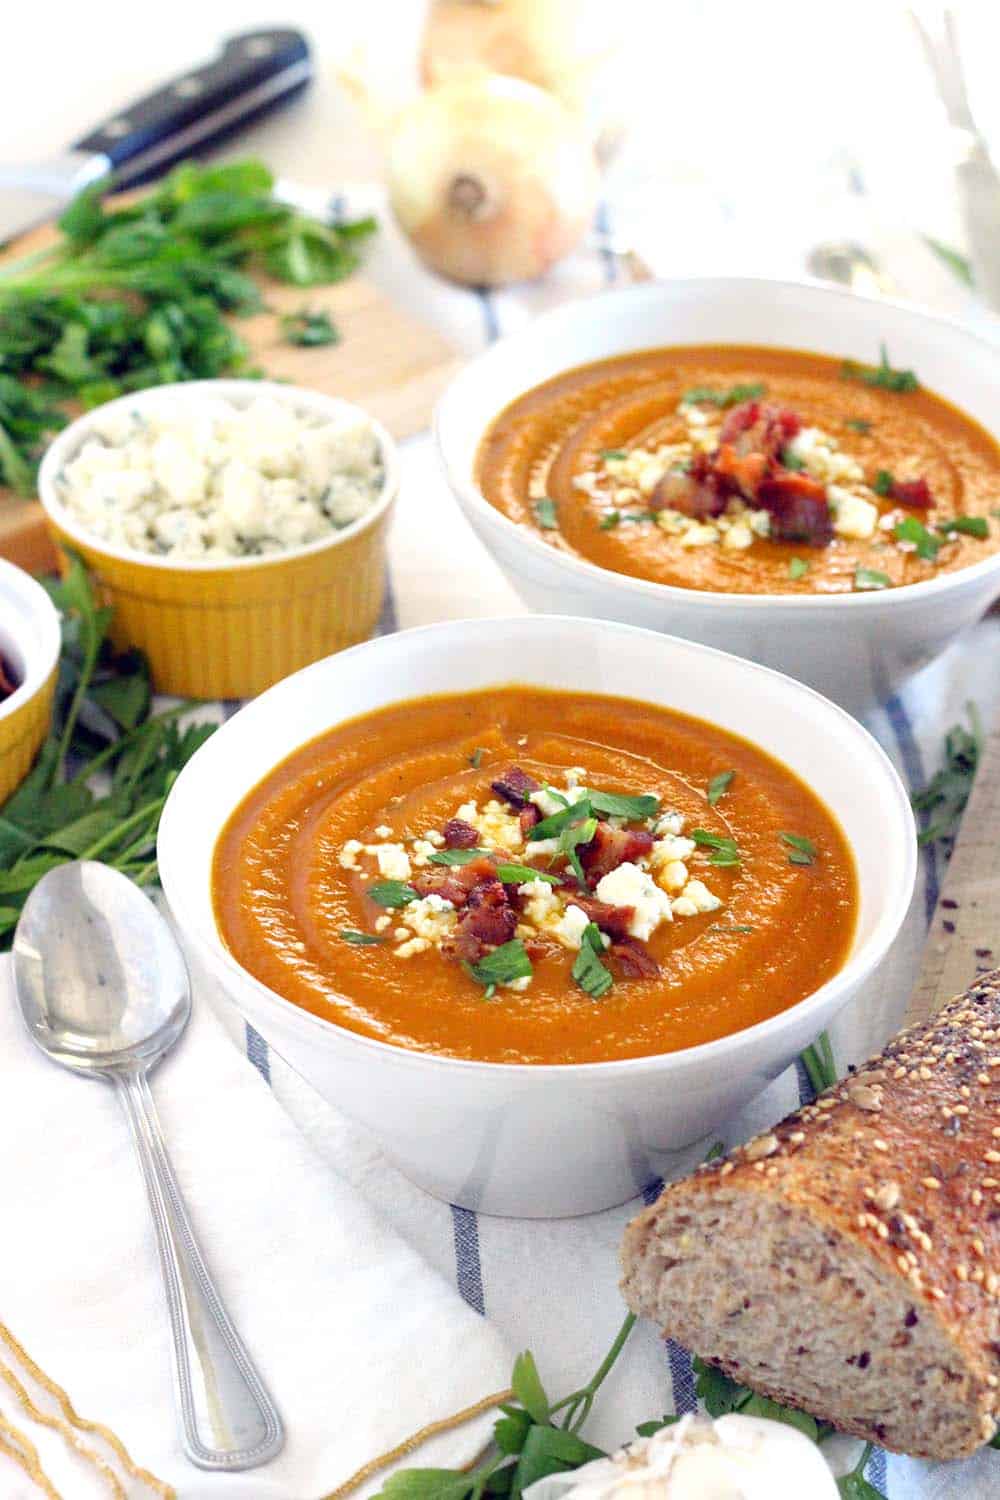 This Smoky Sweet Potato Soup is topped with crunchy bacon and tangy bleu cheese crumbles- an easy and DELICIOUS recipe for cold winter and early spring evenings! Vegetarian/vegan/Paleo optional. 